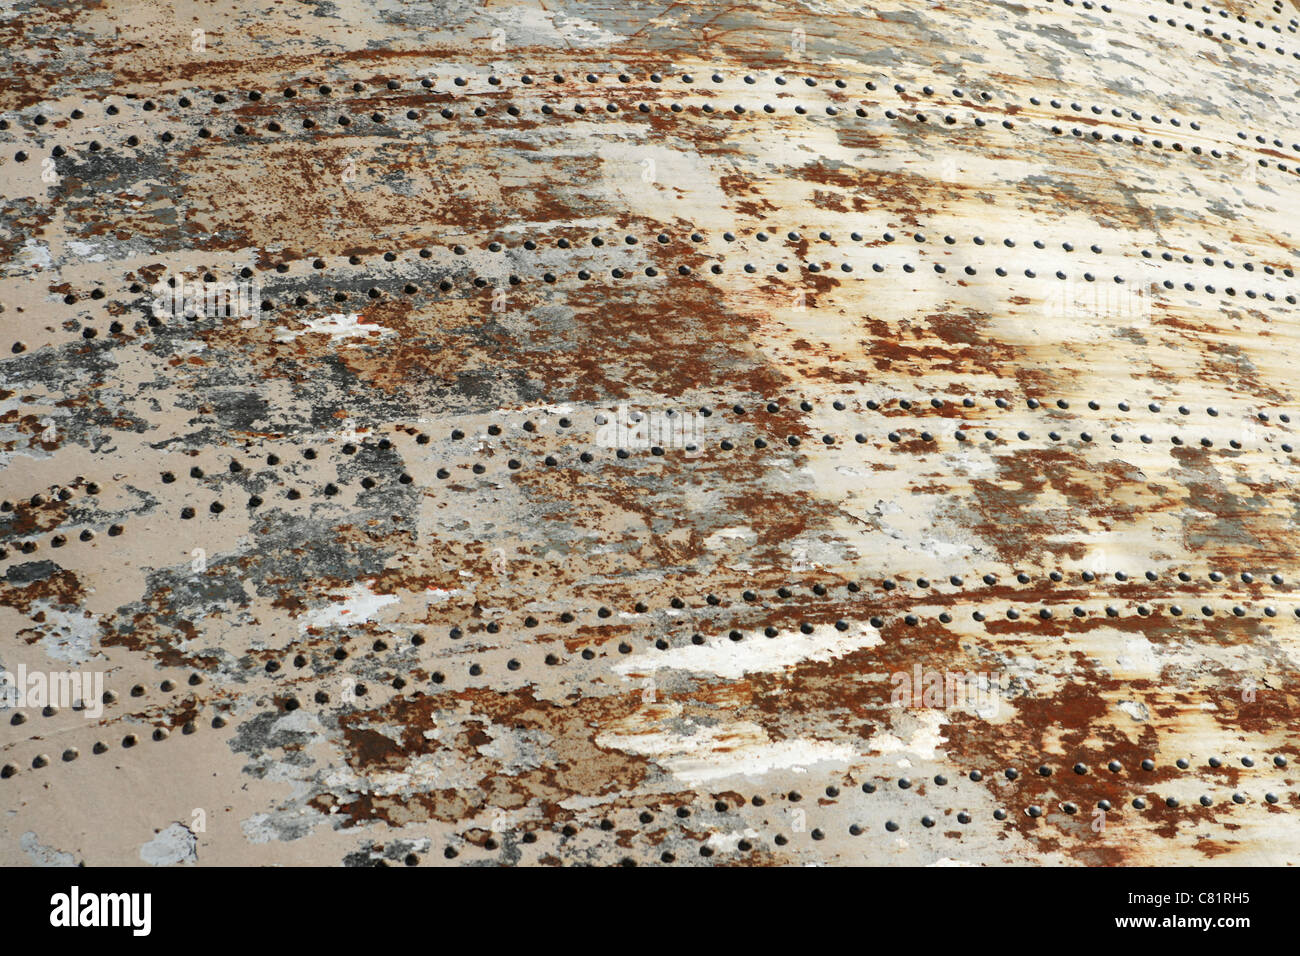 flaking painted rusty metal background with rivet lines from dam spillway gates Stock Photo